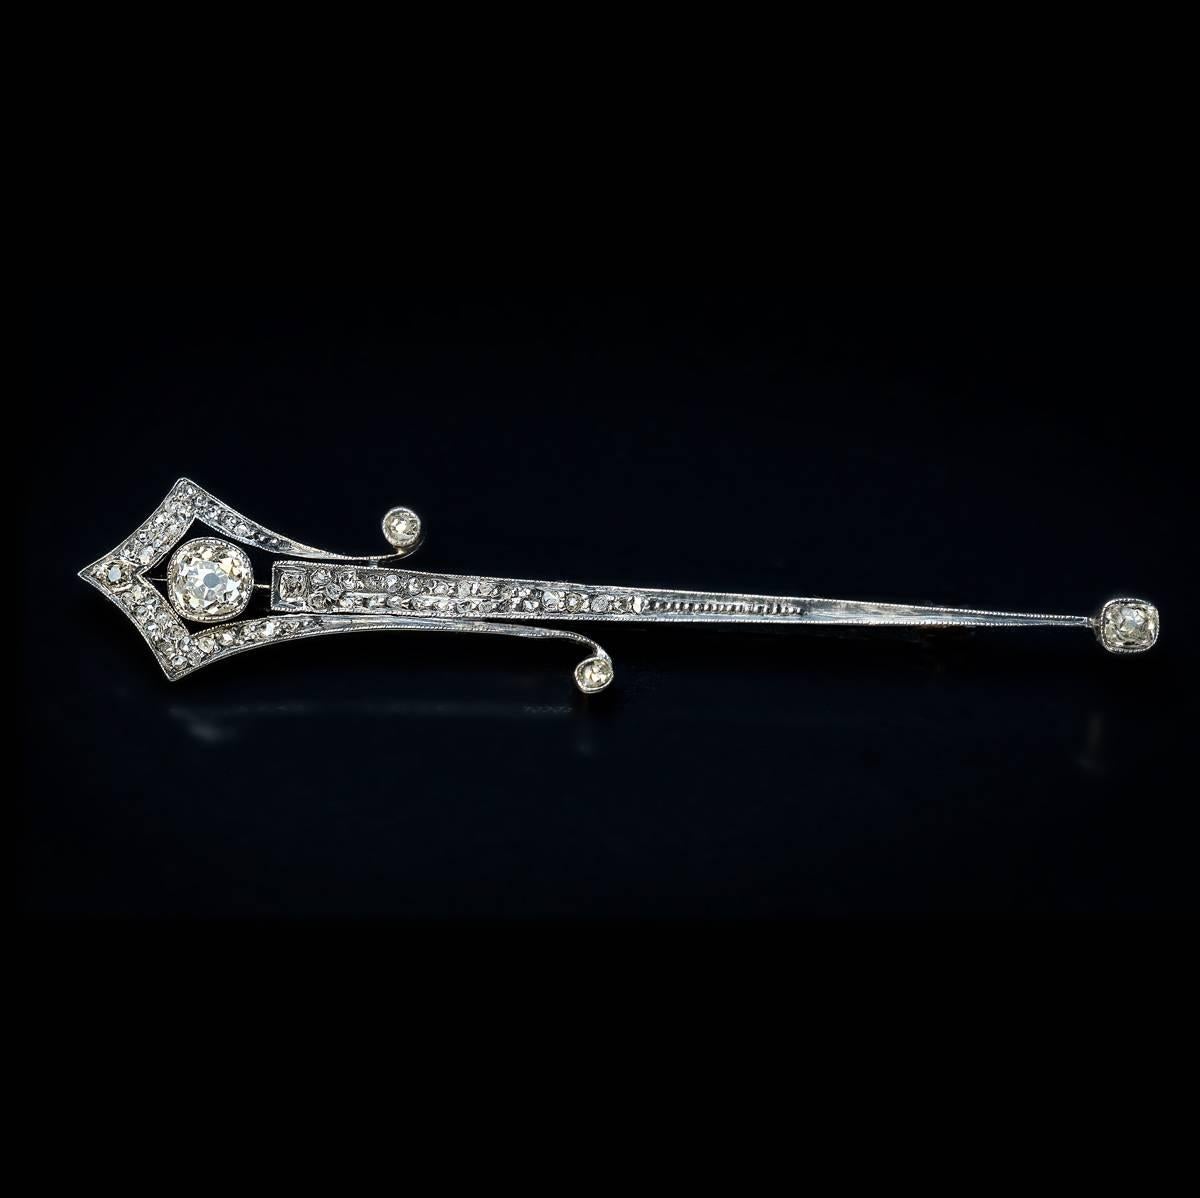 This stylish arrow motif antique brooch / pin was made in Russia around 1910. The brooch is handcrafted in silver topped 14K gold and set with old cushion and rose cut diamonds.

It is likely that the design of this brooch was inspired by Helley’s